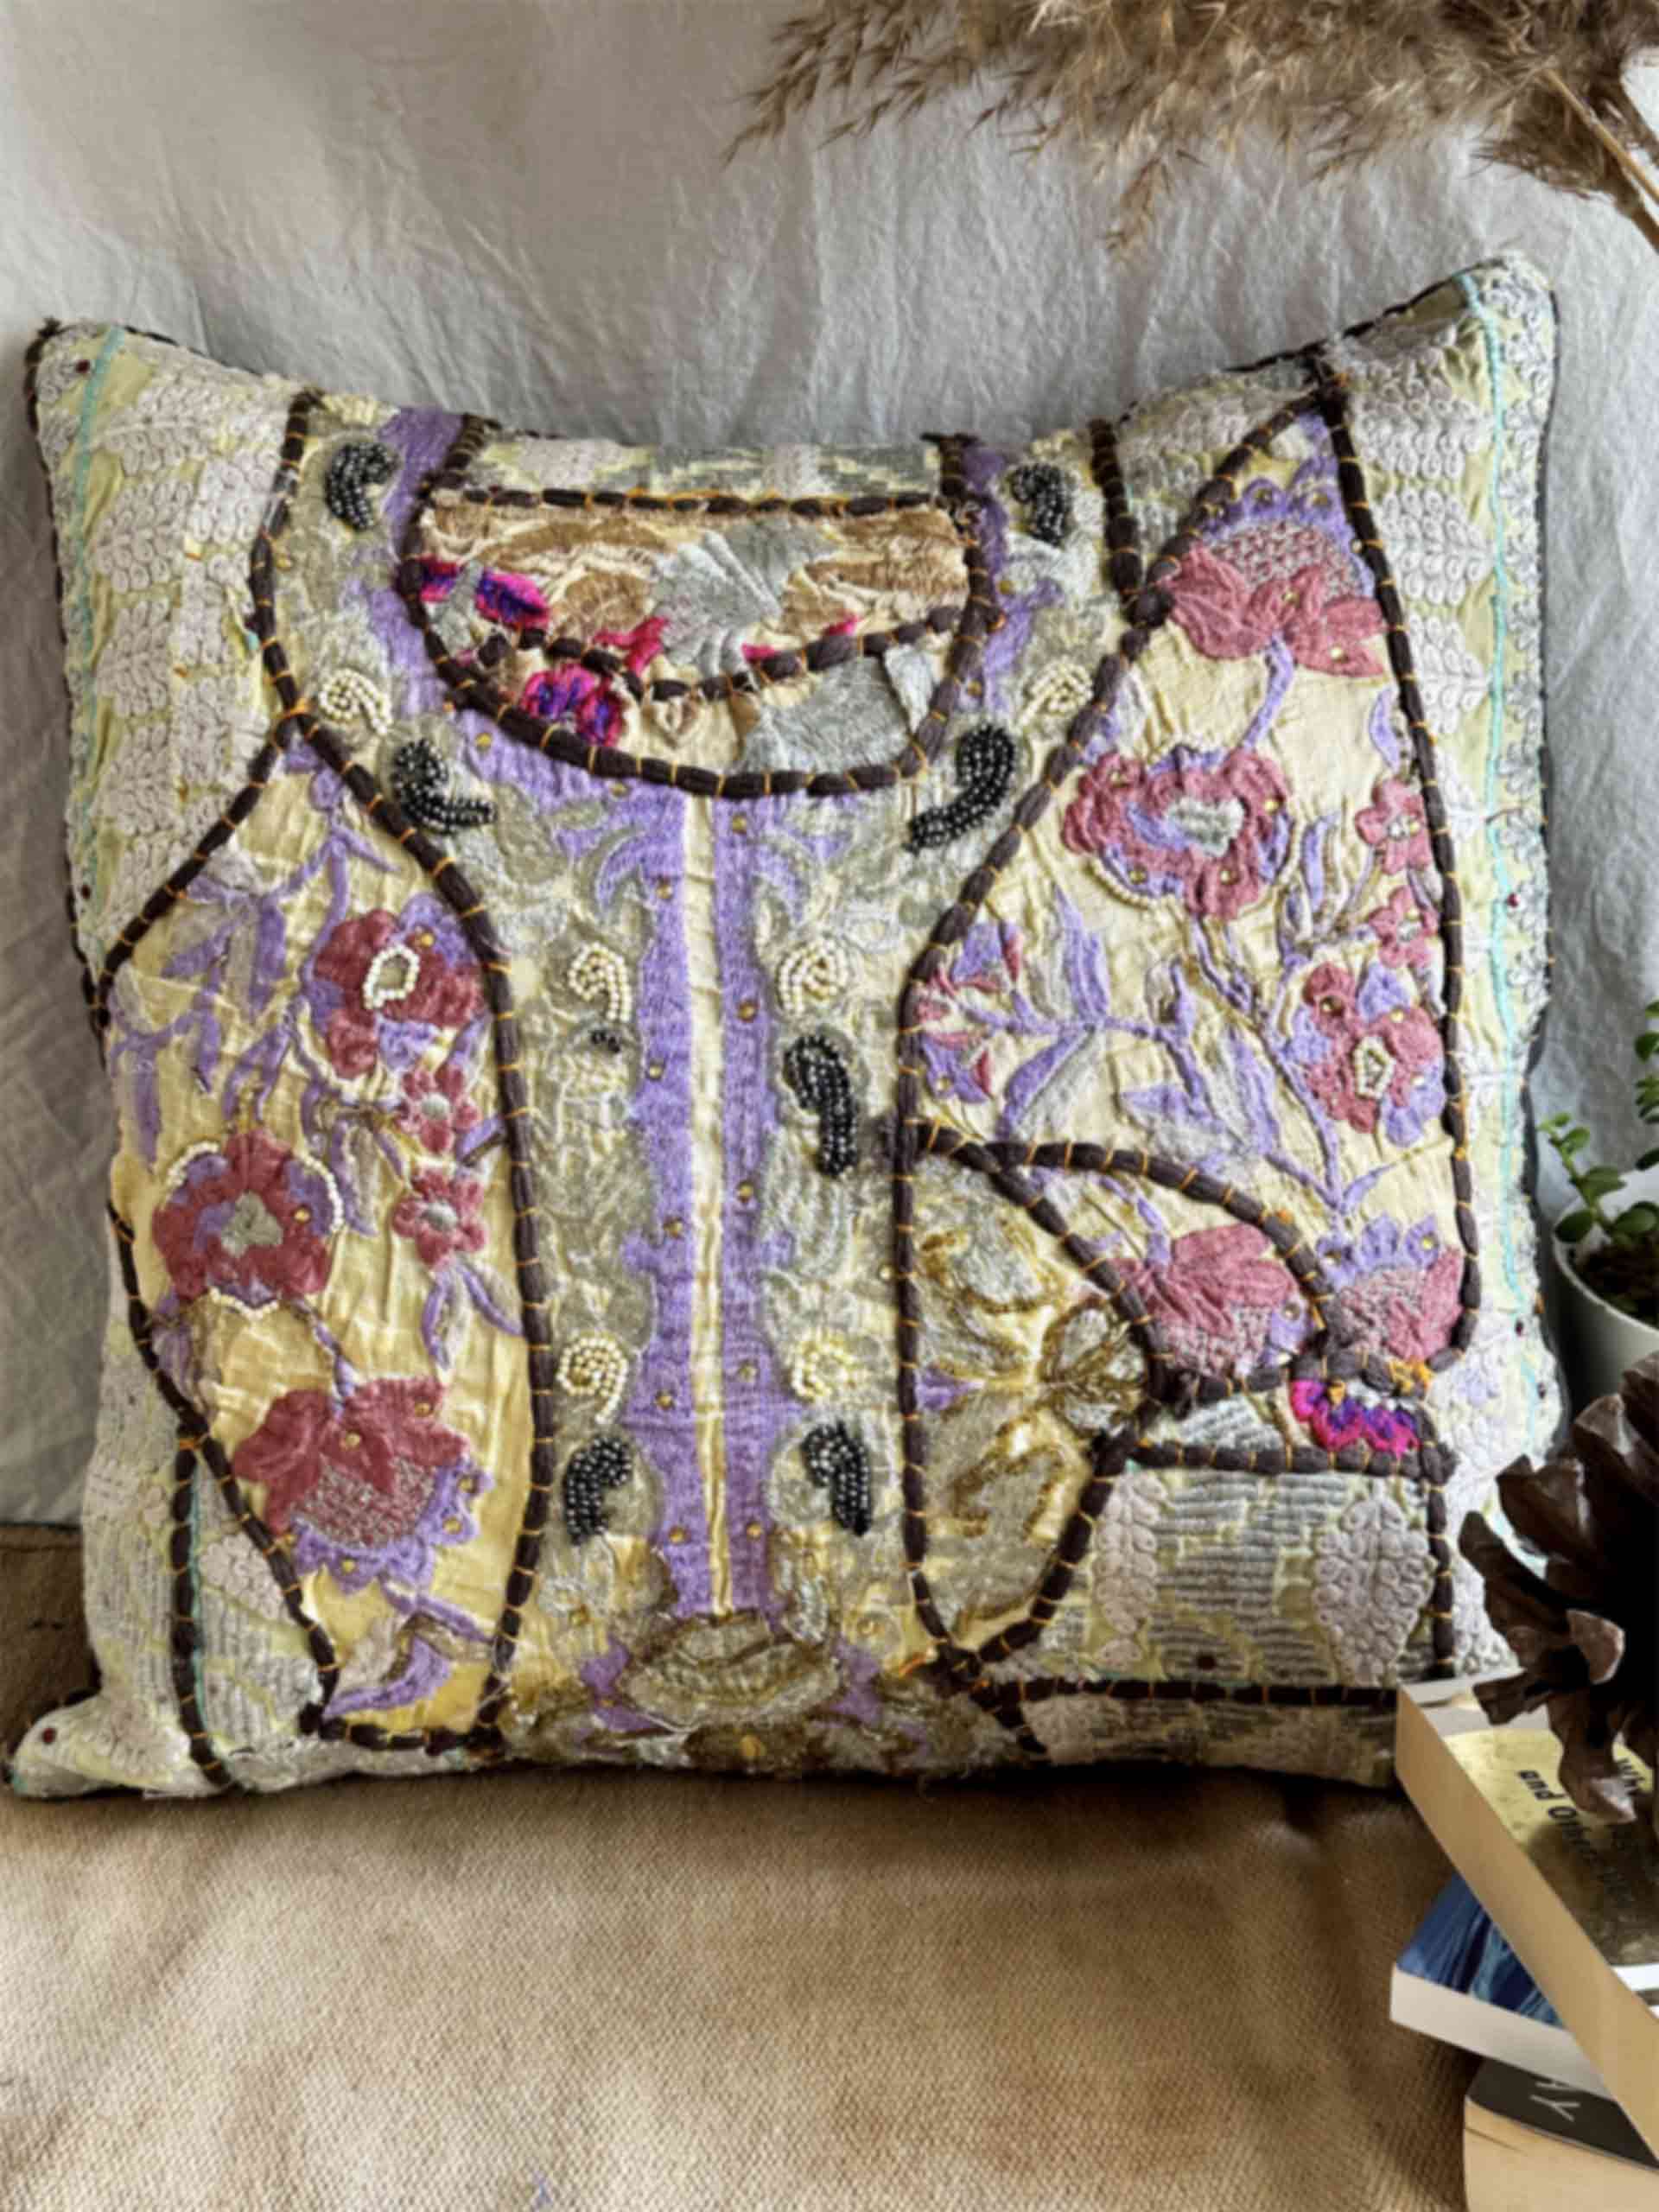 city of pastels - embroidered patchwork cushion cover 16X16